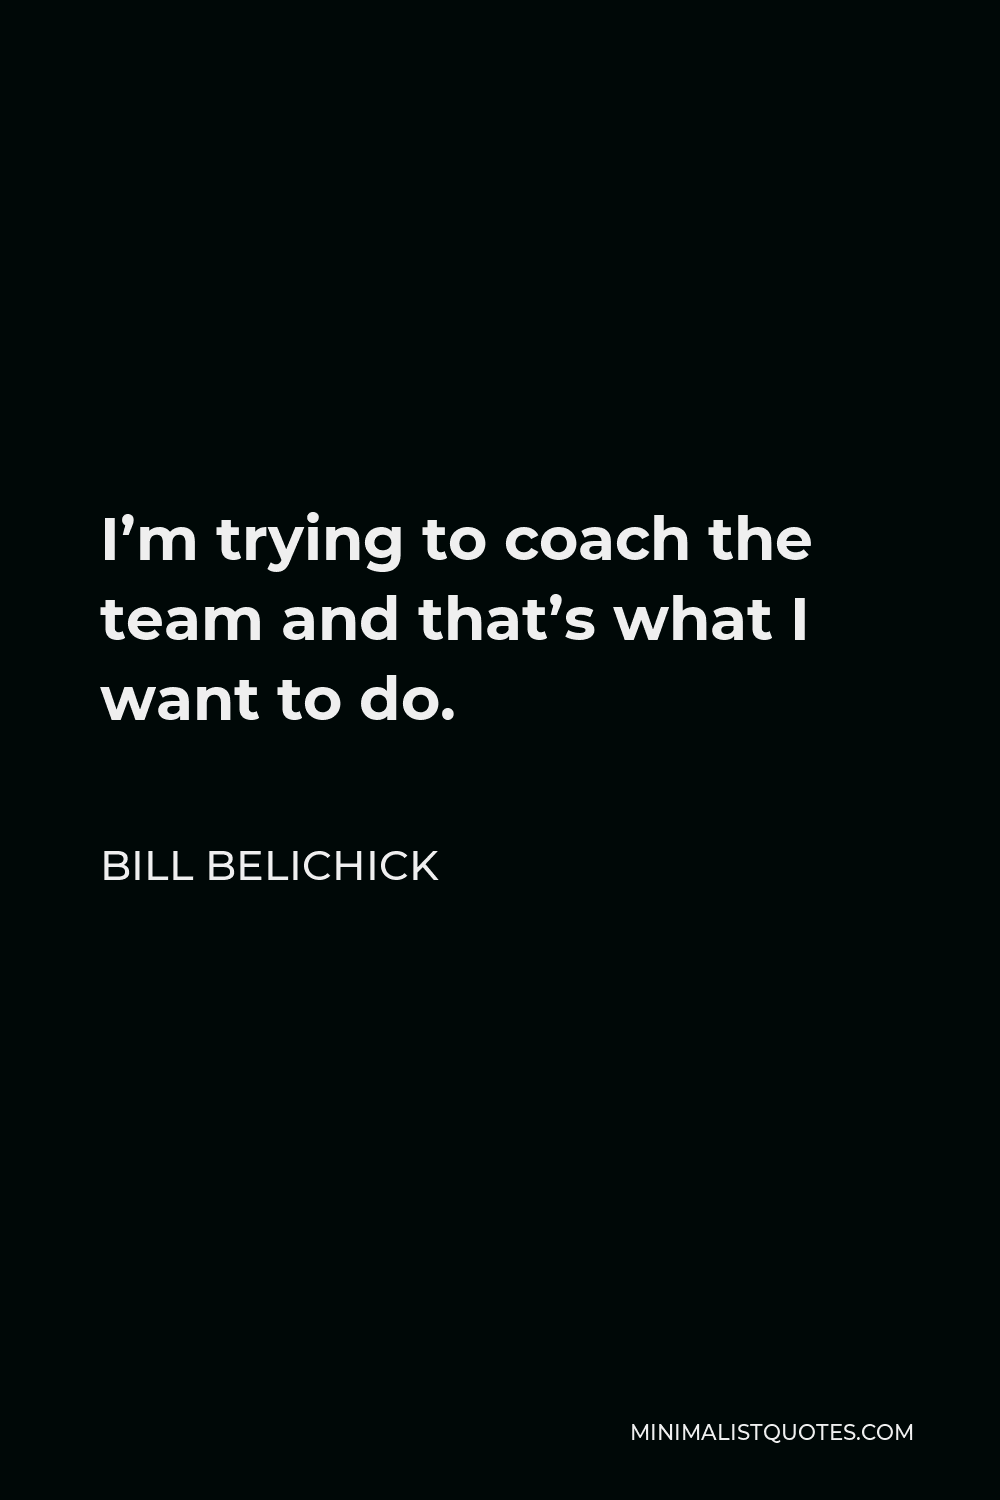 Bill Belichick Quote - I’m trying to coach the team and that’s what I want to do.